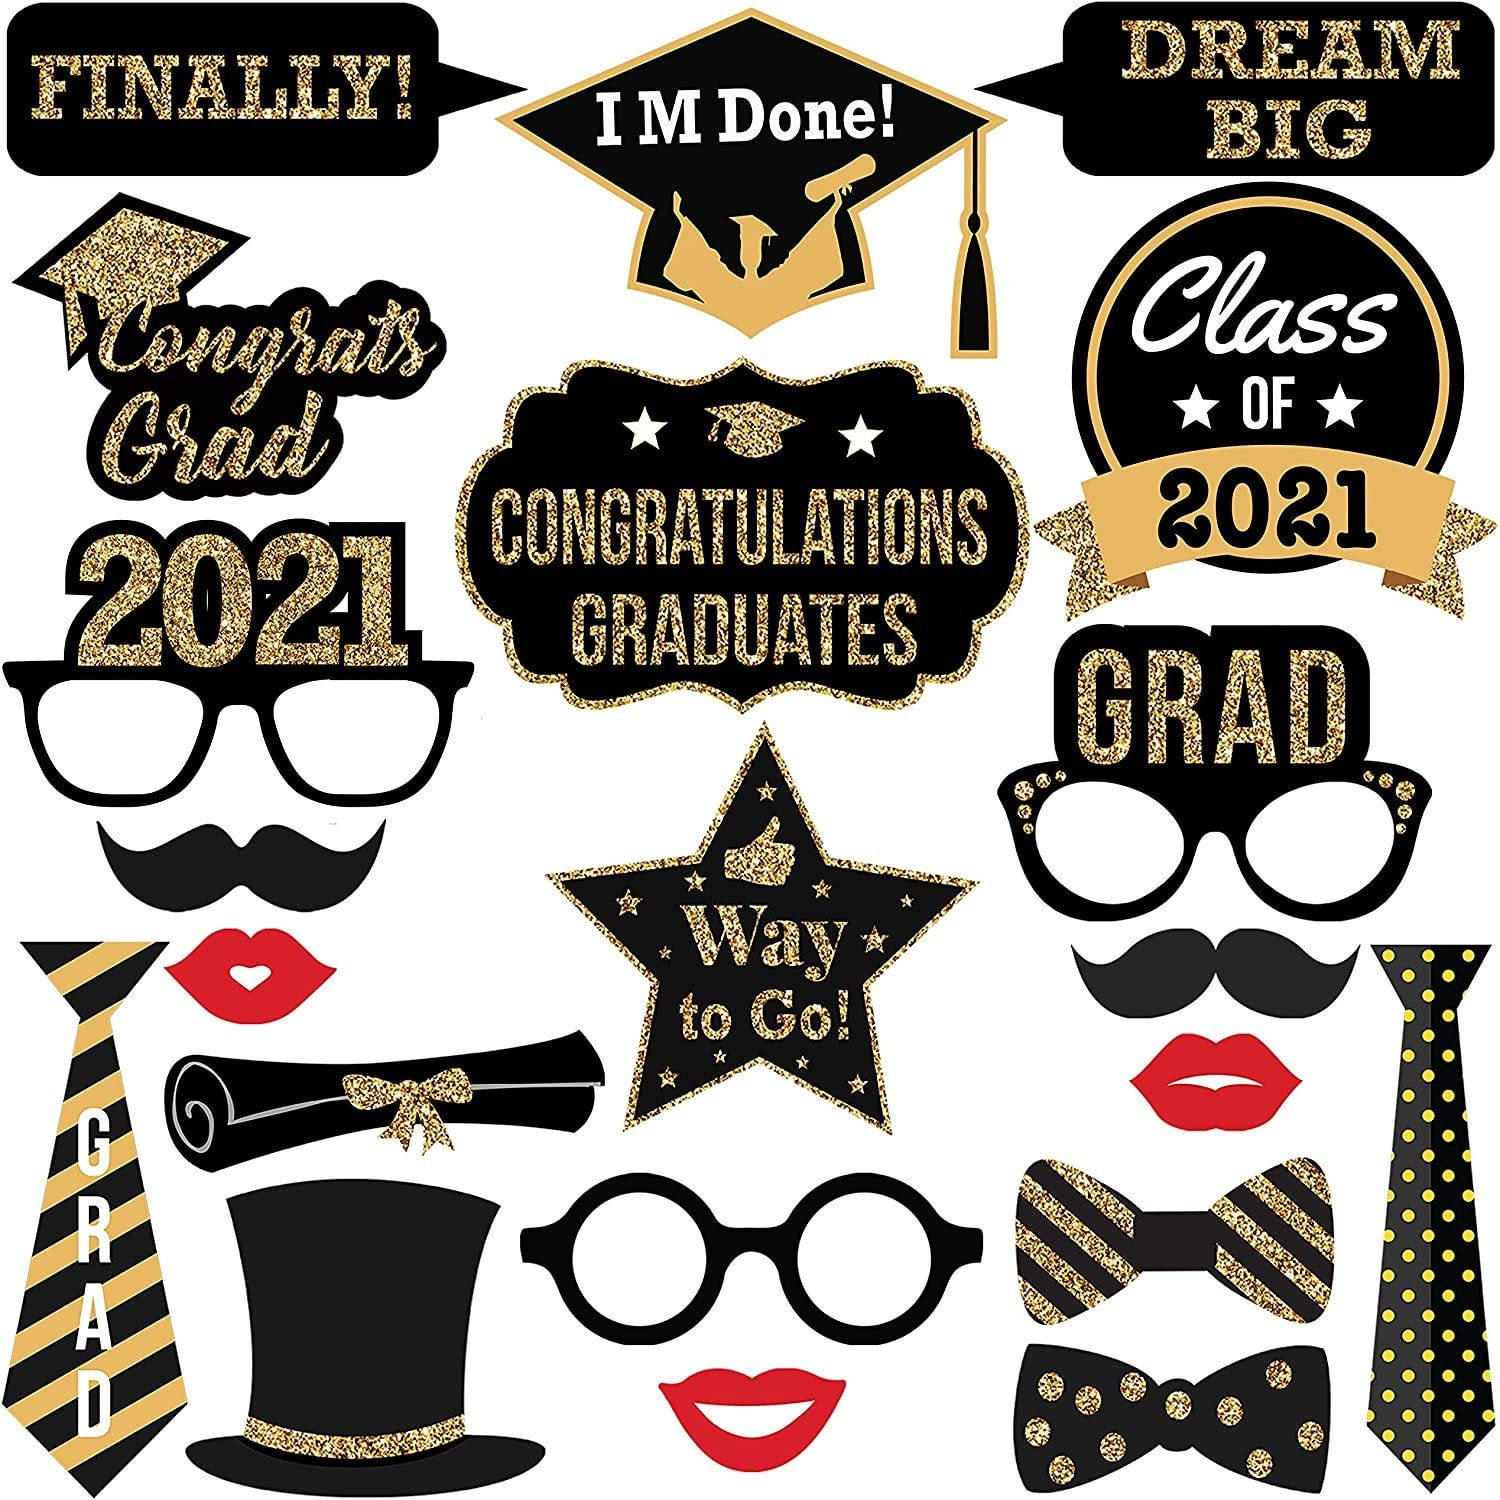 large-graduation-photo-booth-props-2021-glitter-diypack-of-etsy